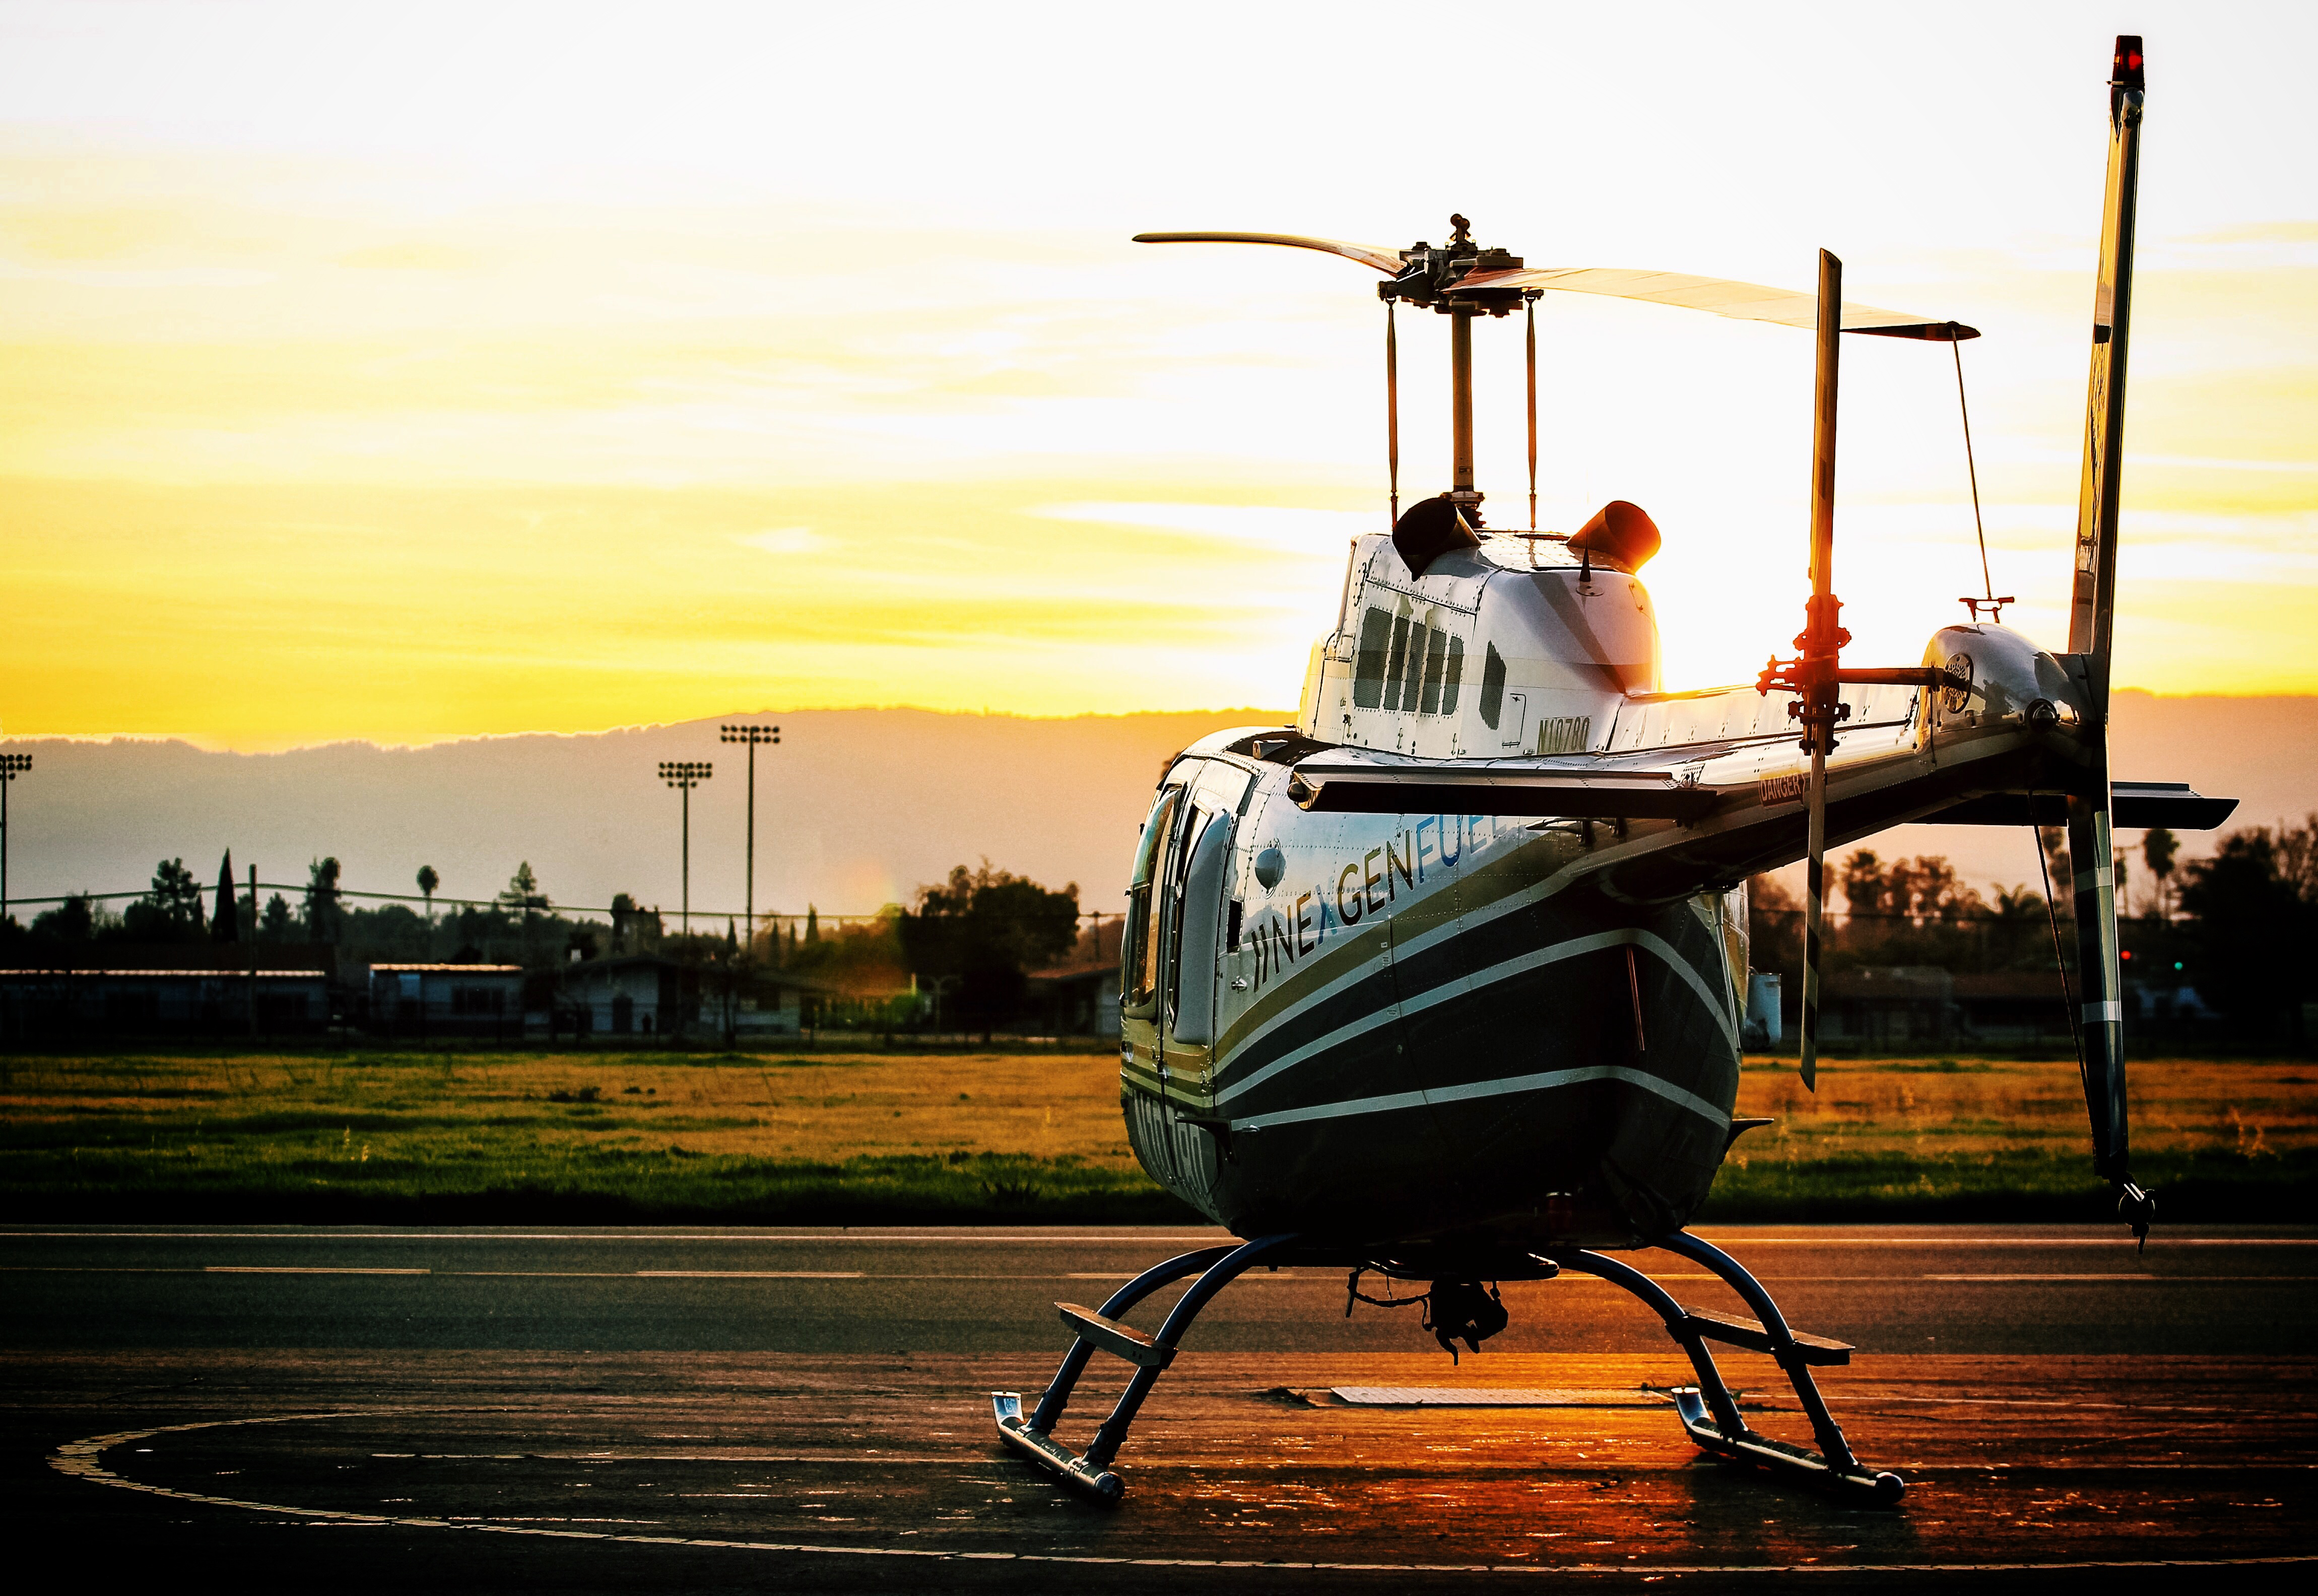 Helicopter Sunset Airfield